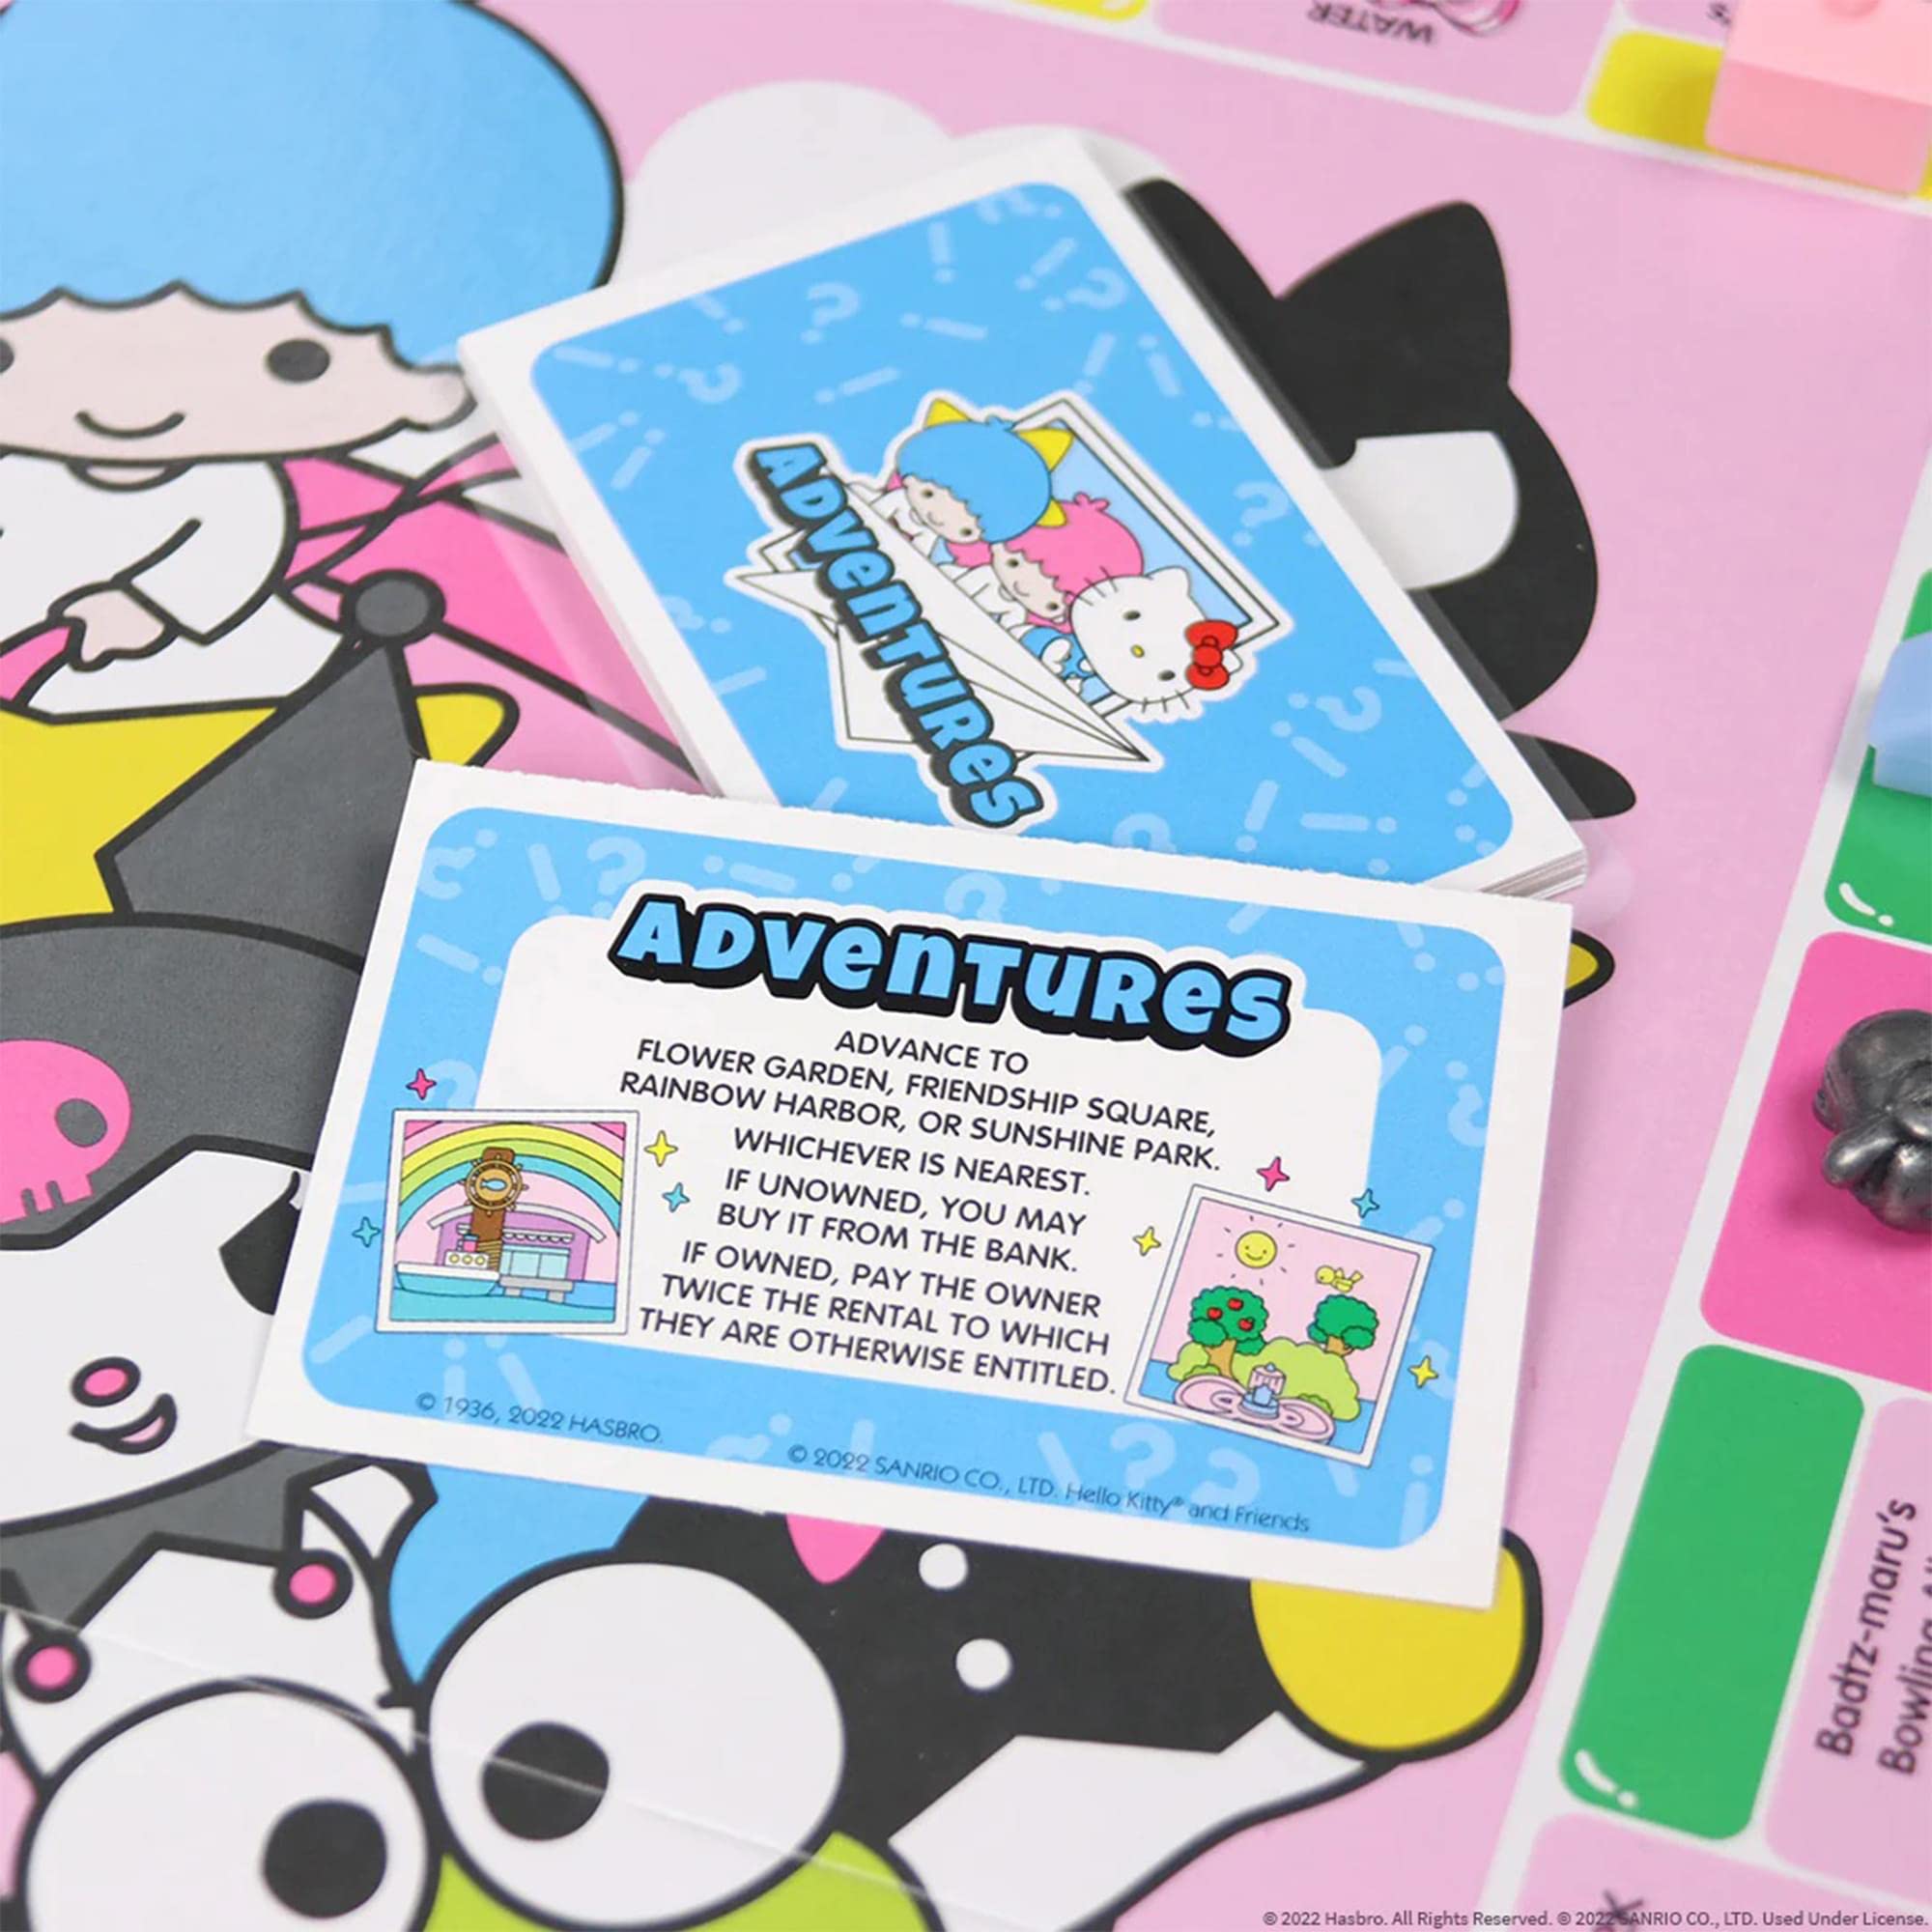 Monopoly: Hello Kitty and Friends,6 players